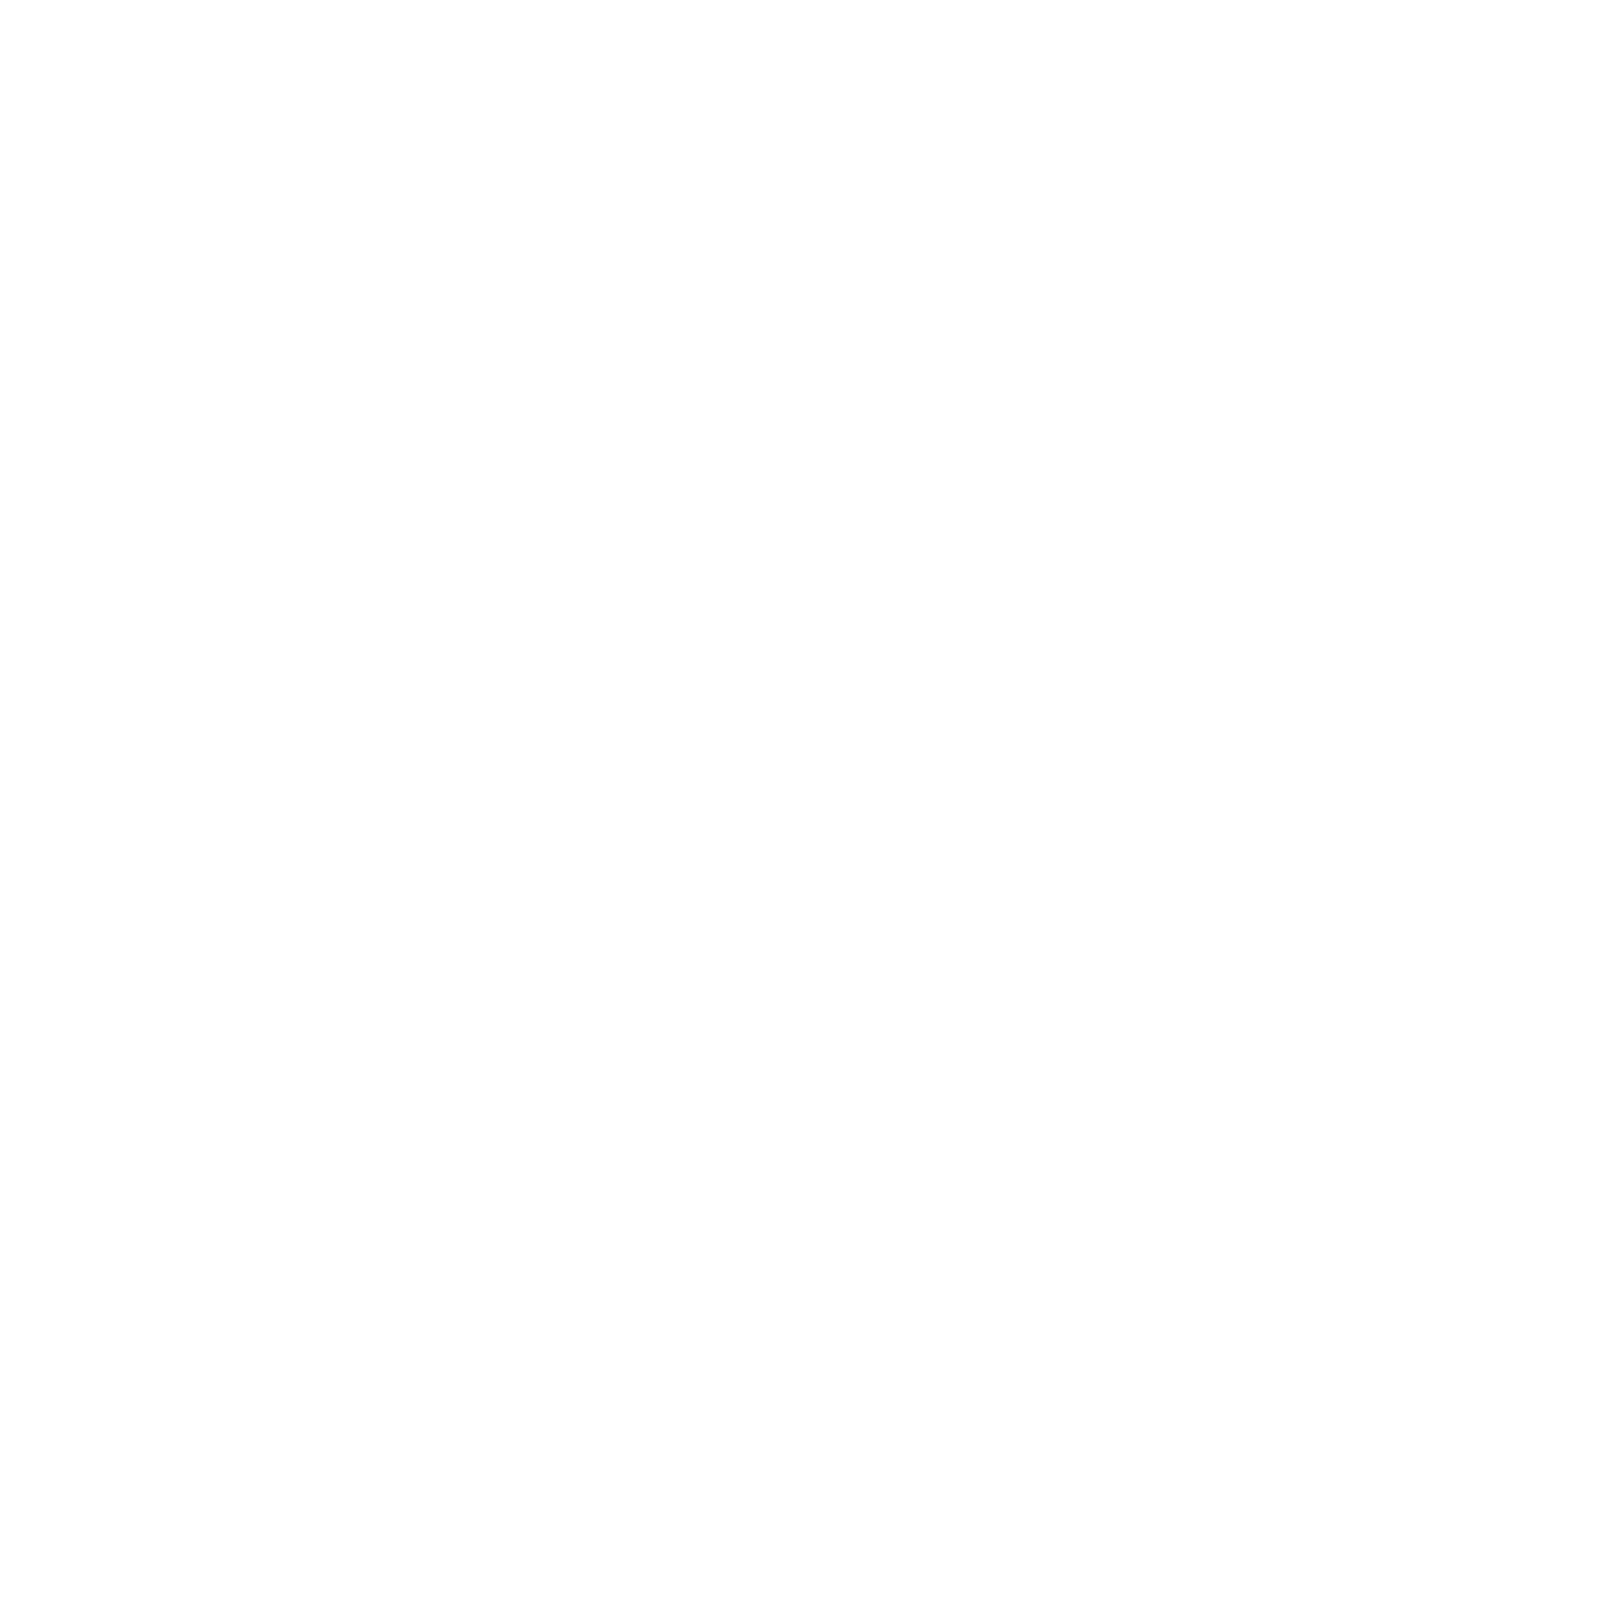 Womb to World Photography